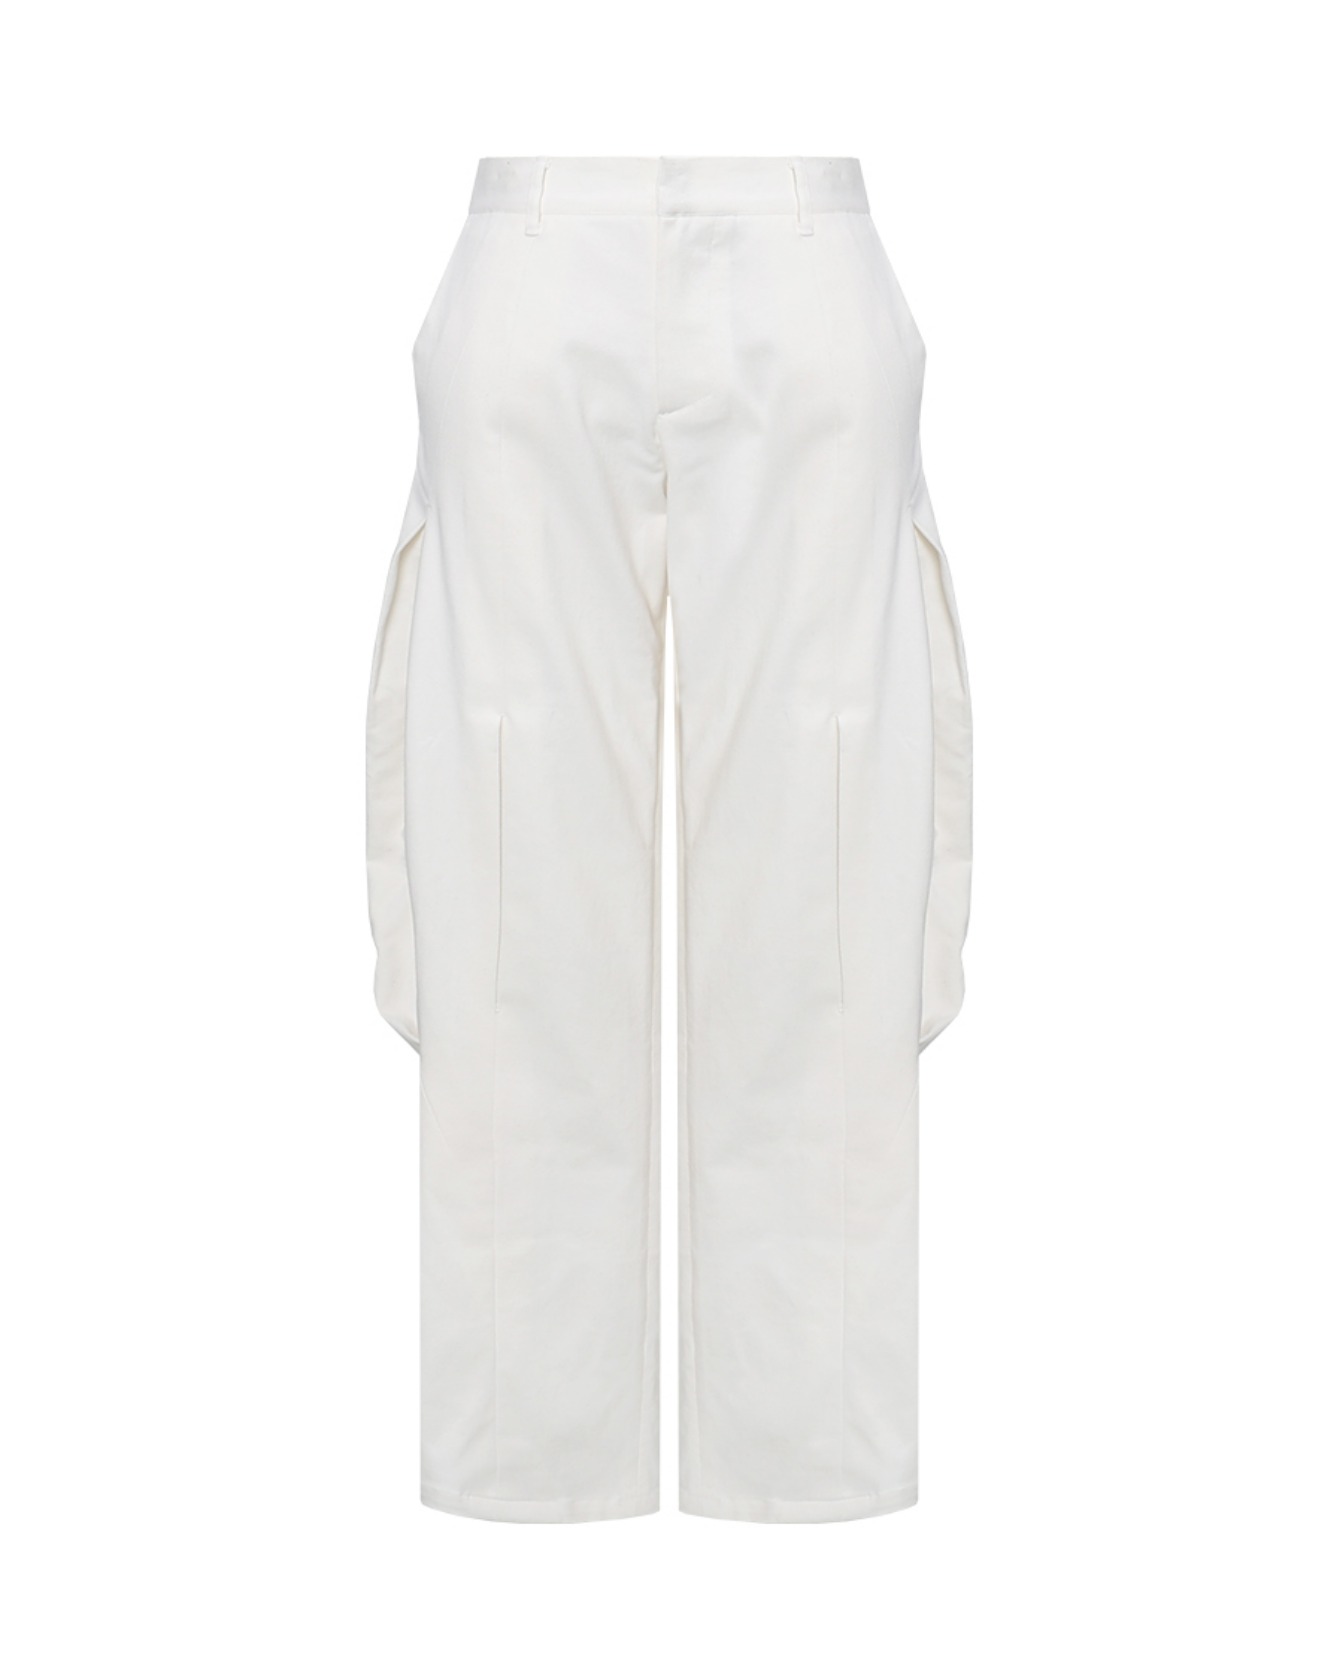 (In)     BRANCH TROUSERS  (WHITE)